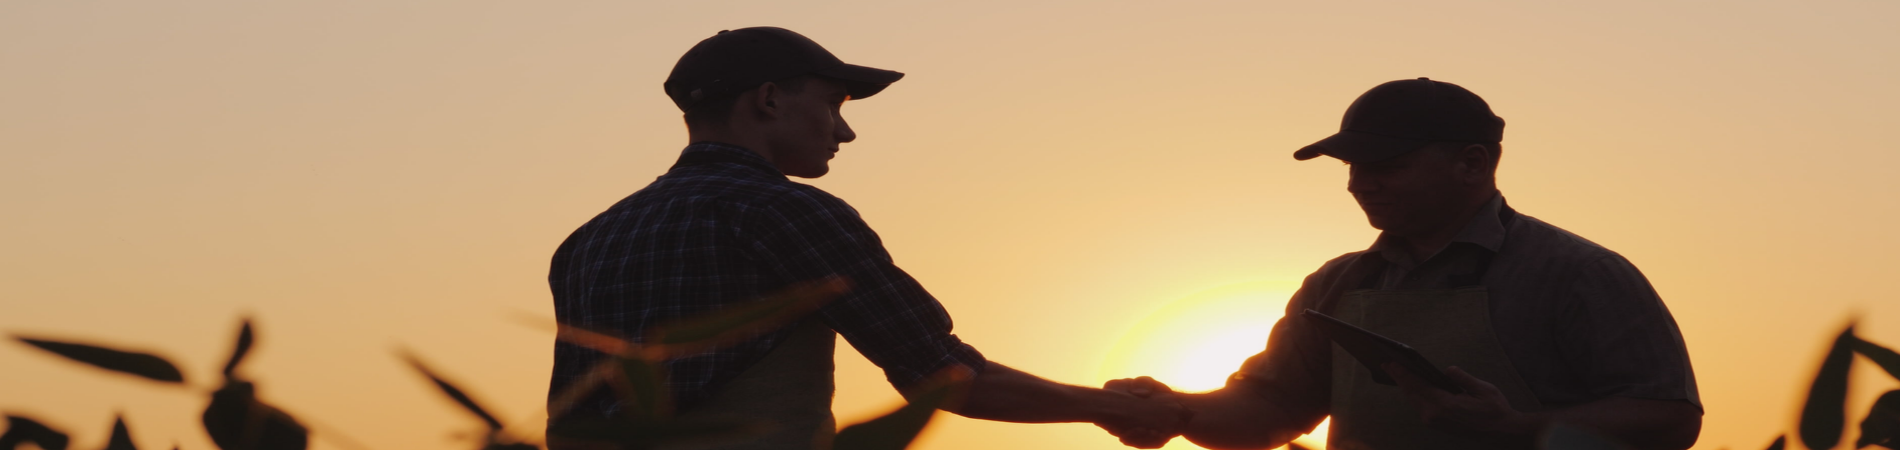 farmers shaking hands in cornfield at sunset